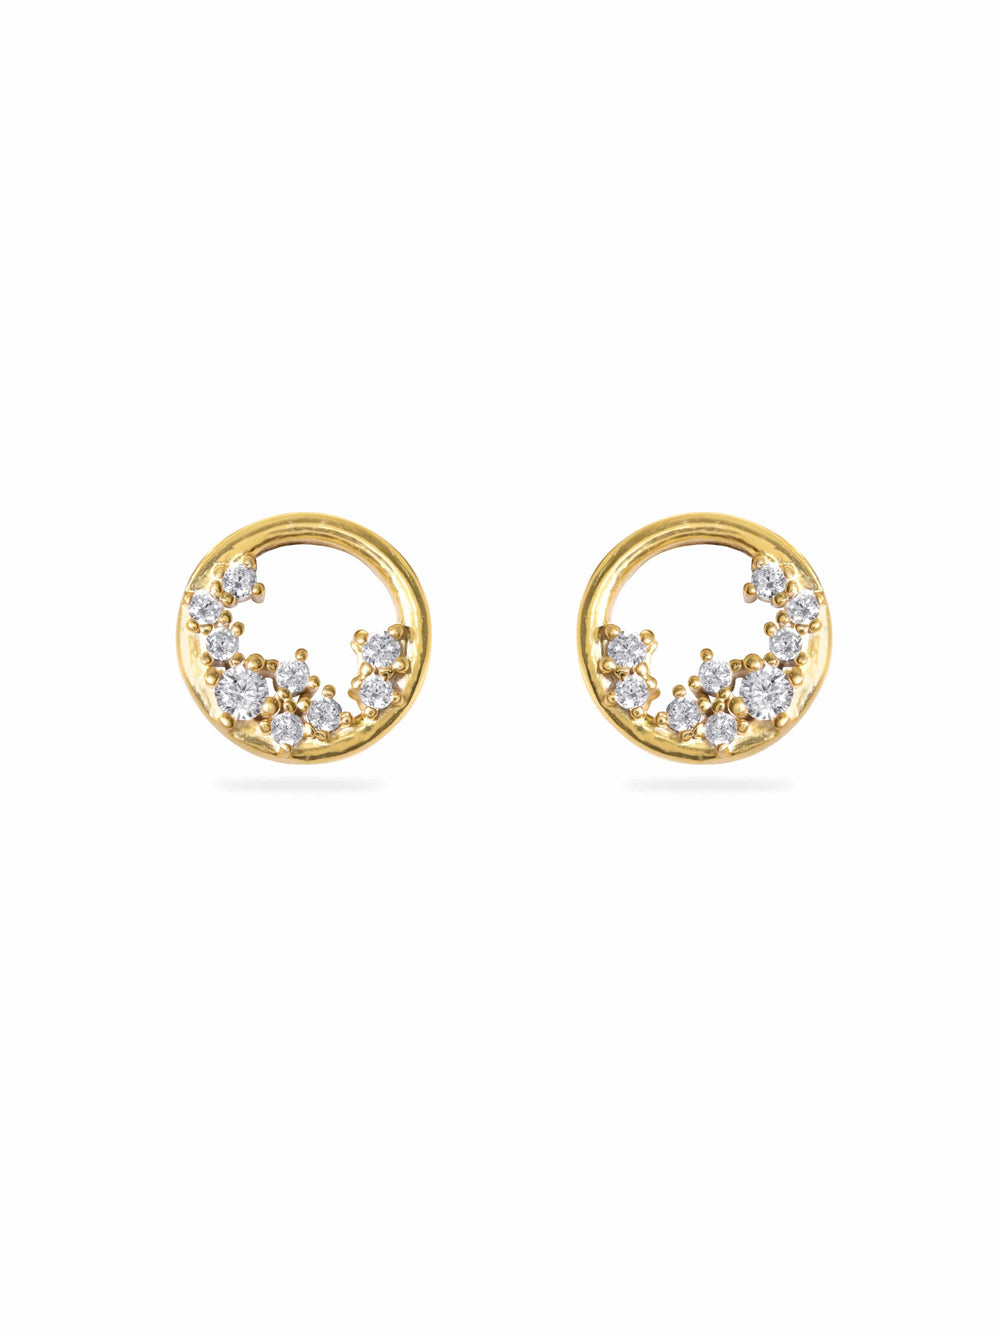 Rubans Silver 22k gold plated 325 starling silver zirconia studded contemporary Stud earring Earrings